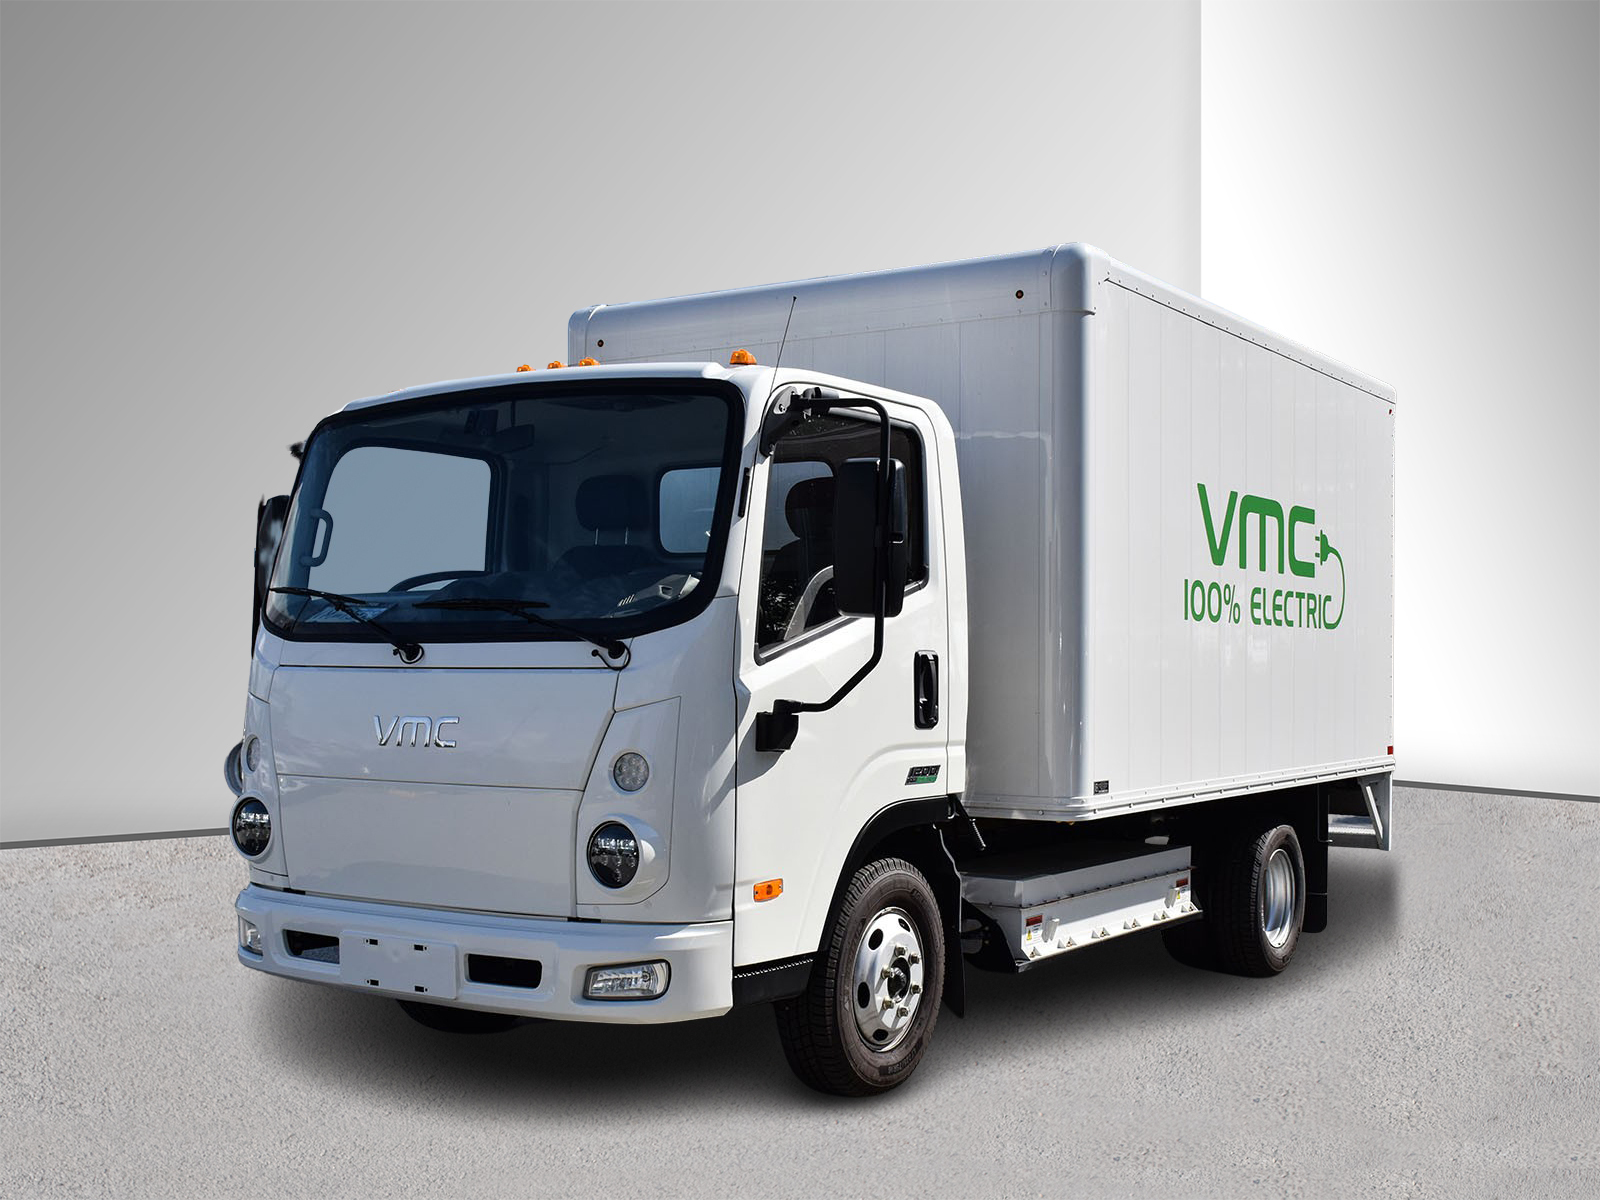 2023 VMC 1200 - Fully Electric Commercial Truck!